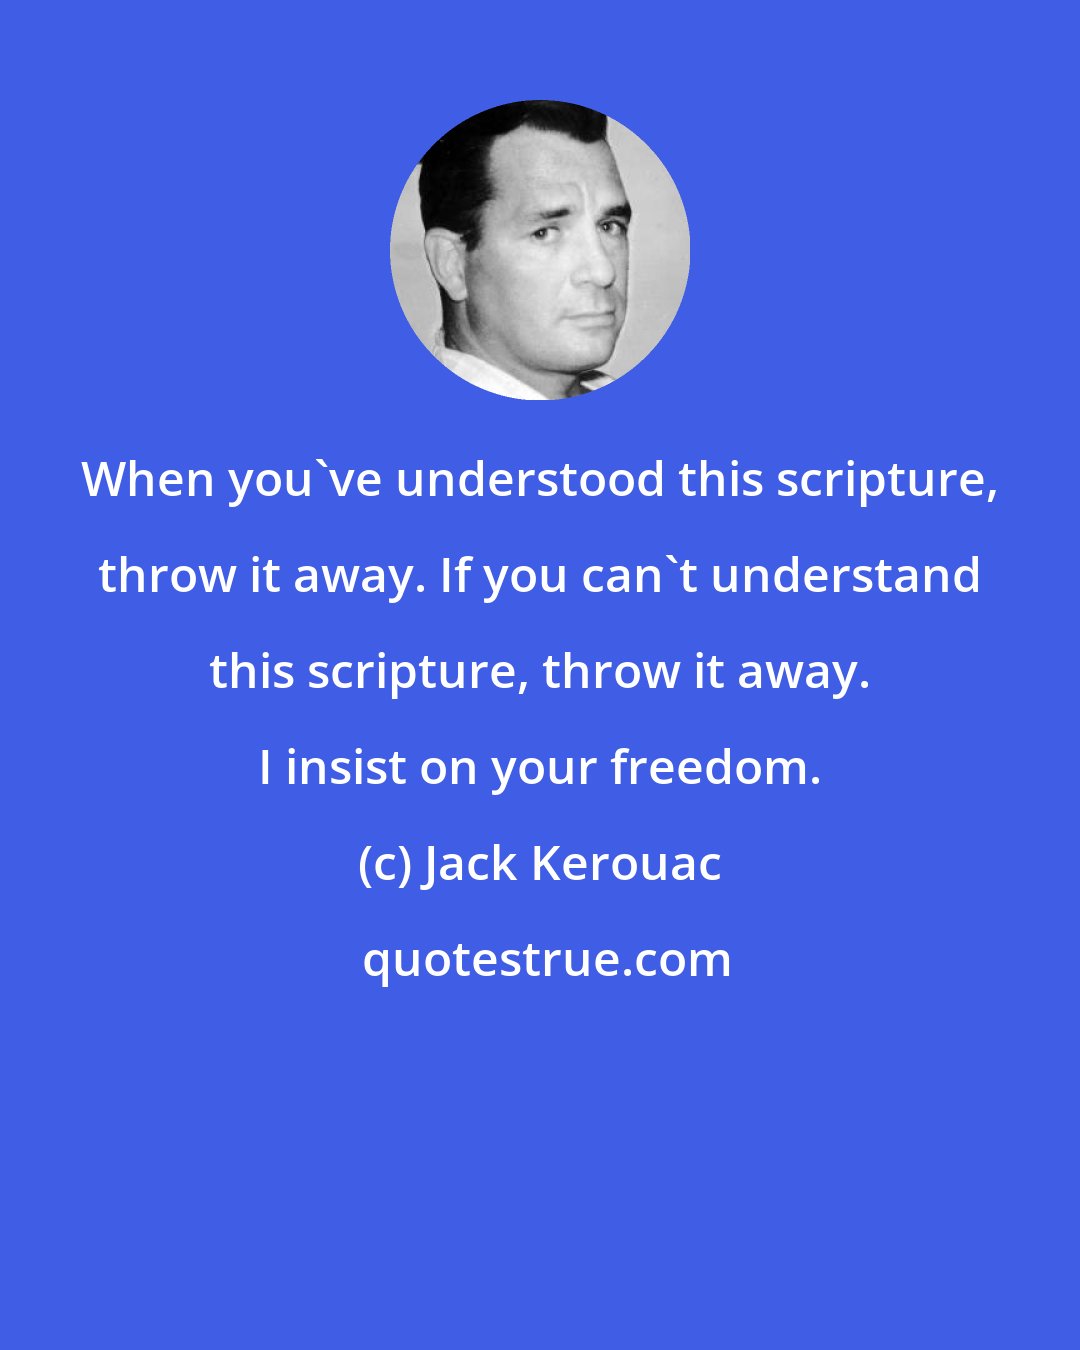 Jack Kerouac: When you've understood this scripture, throw it away. If you can't understand this scripture, throw it away. I insist on your freedom.